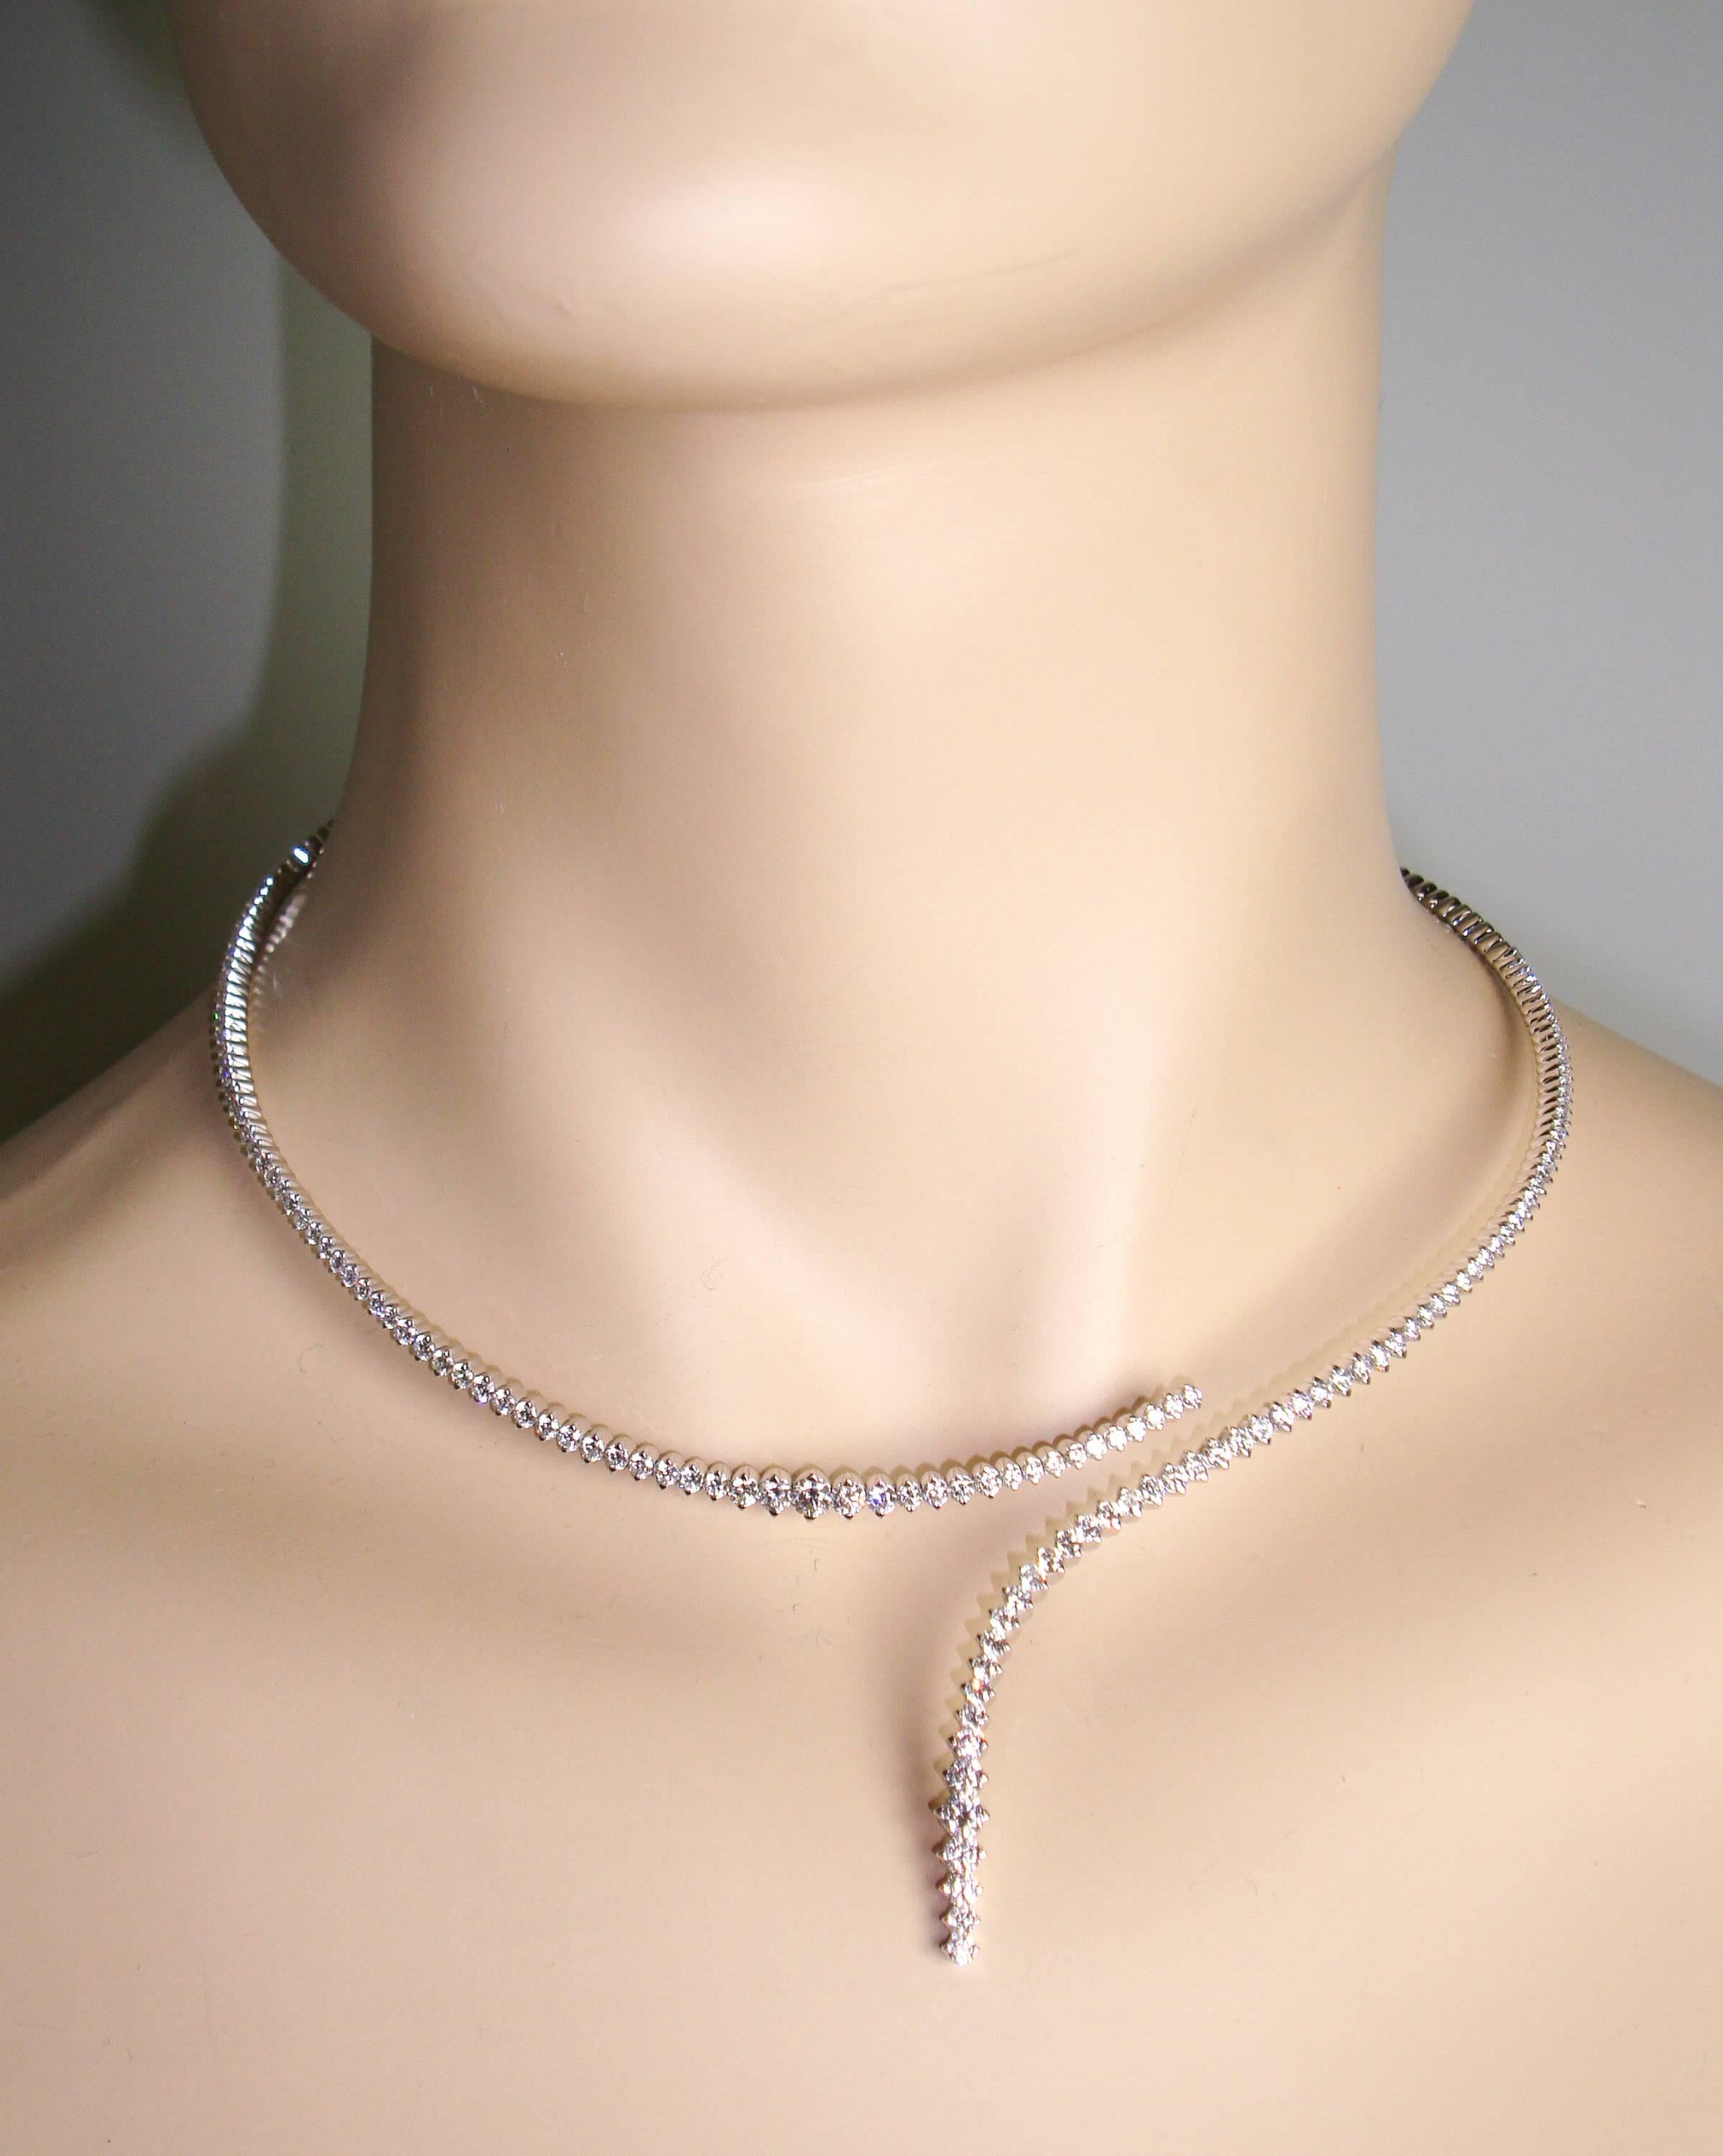 Distinctive Diamond Necklace, Italian designed reflecting style and sophistication in a unique way. Expertly handcrafted in 18k white gold giving flexibility to softly sit on your skin as it gleams with 5.61 carats of white round brilliant cut